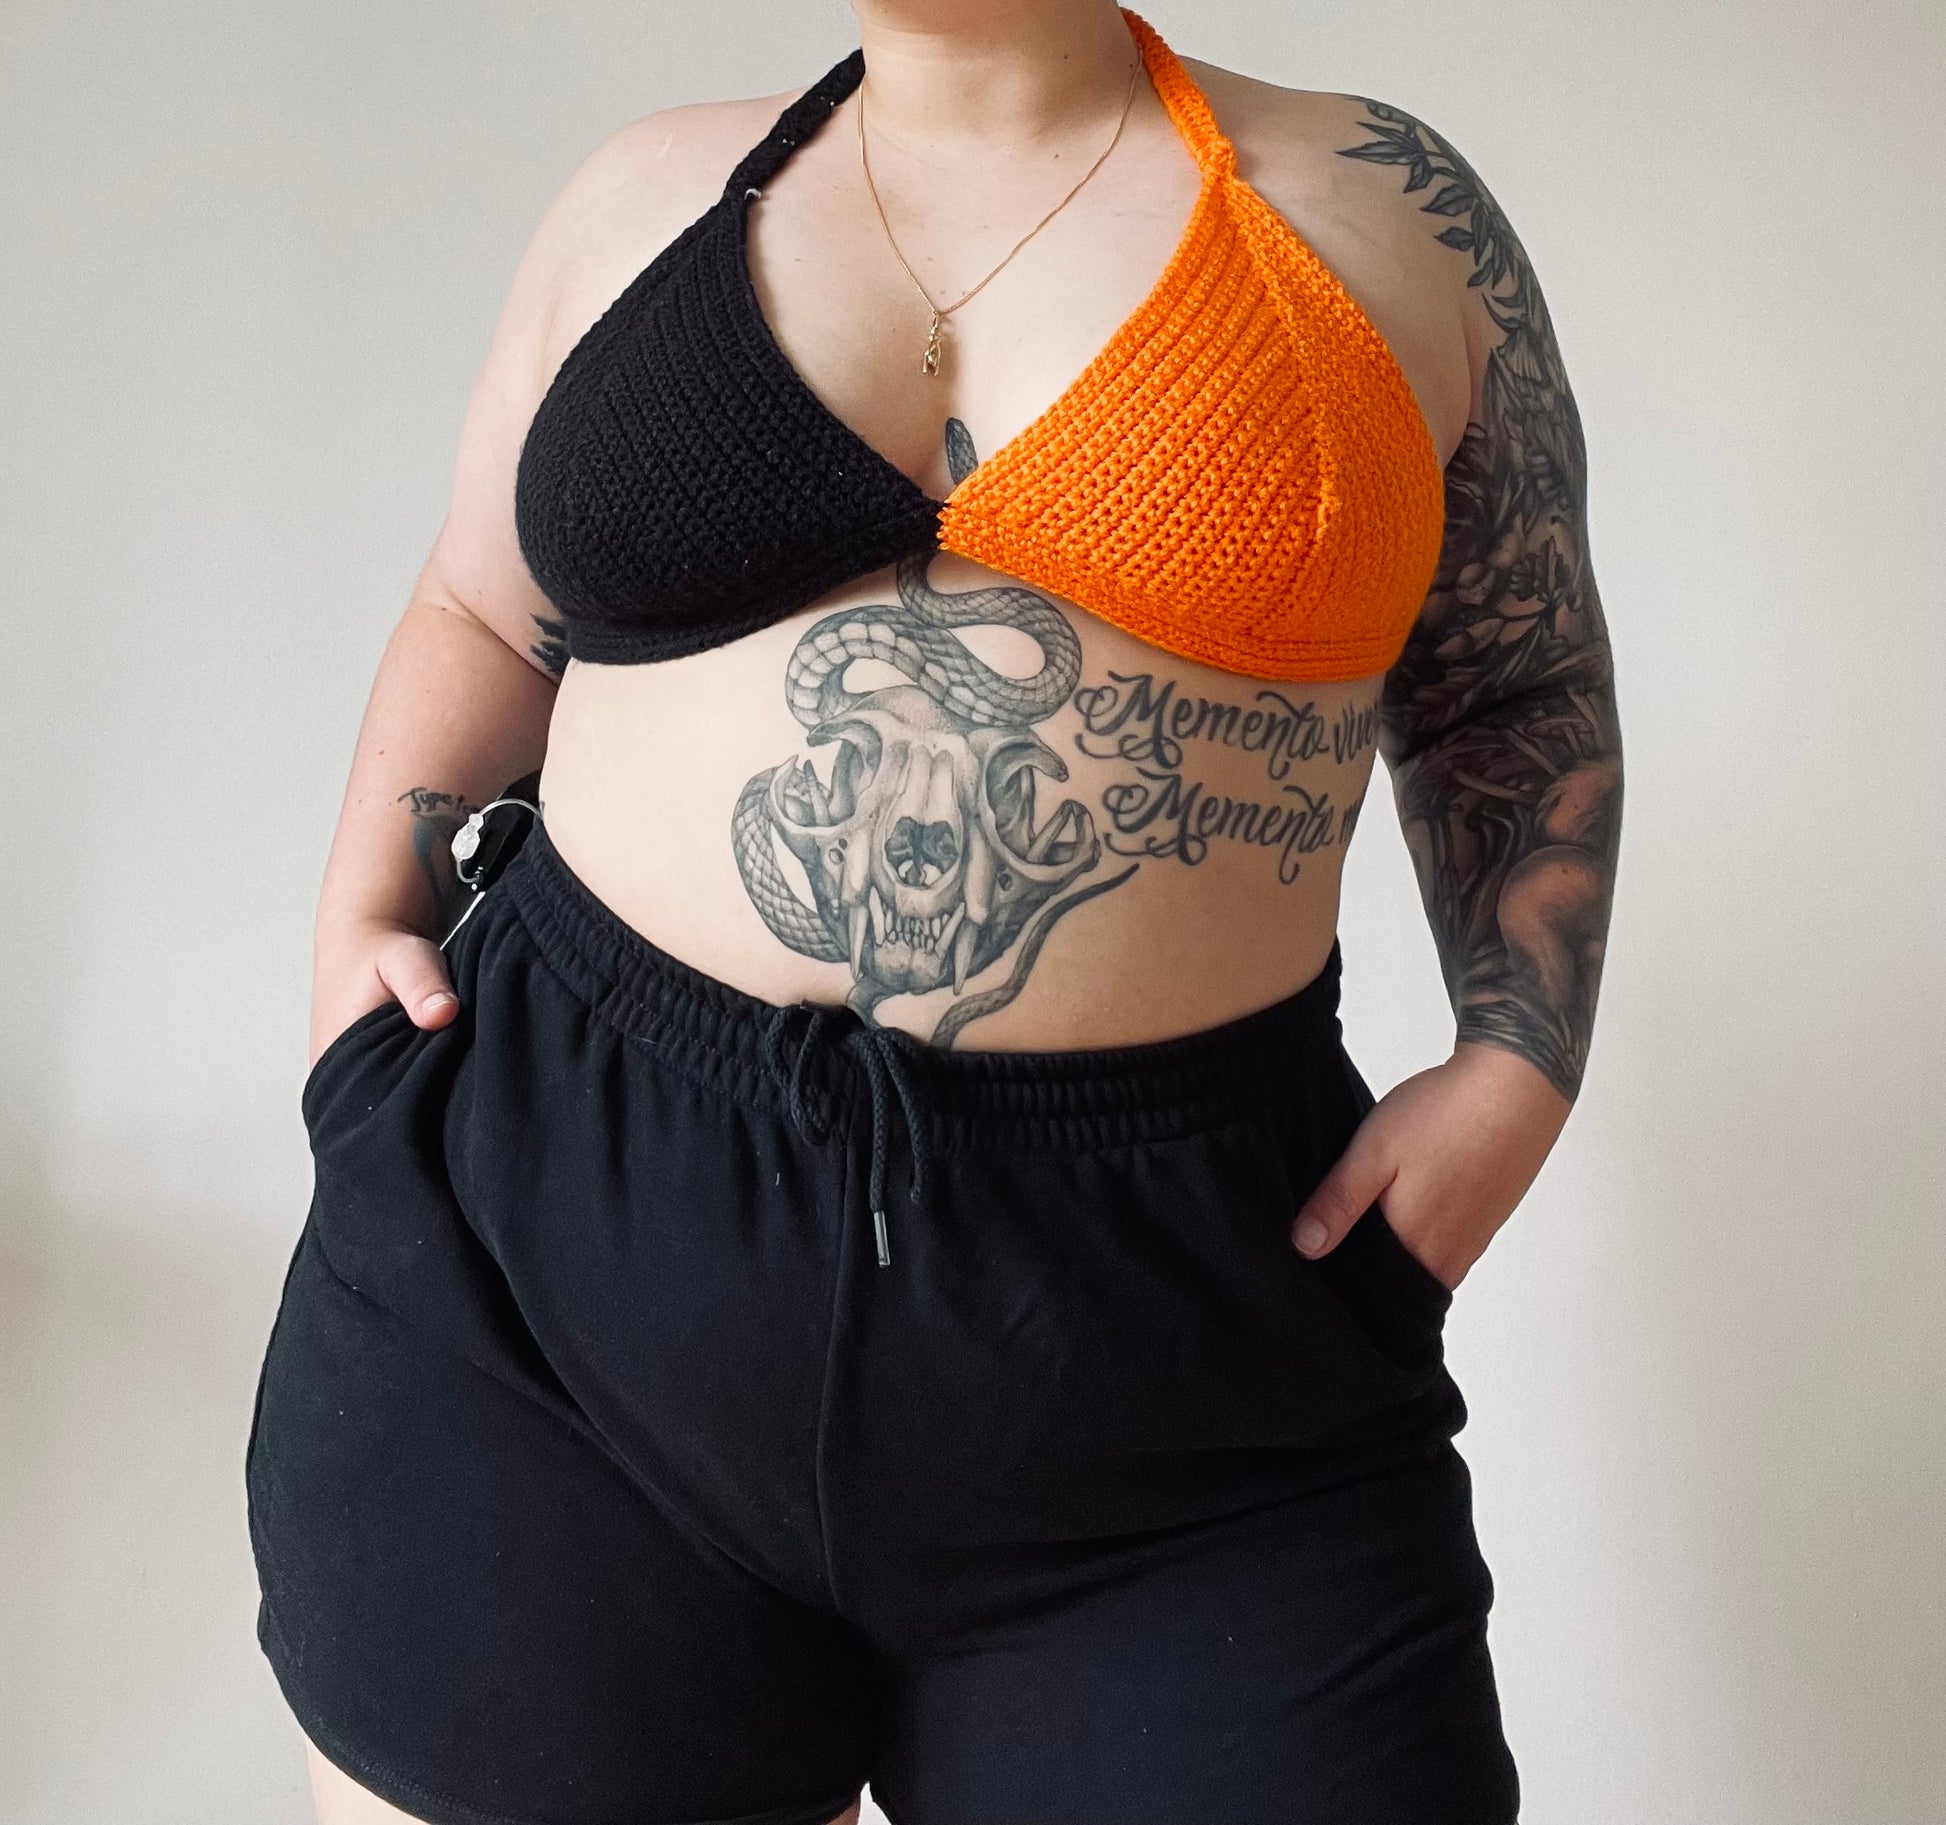 Crochet bralette cop top guvaberry – guavaberry